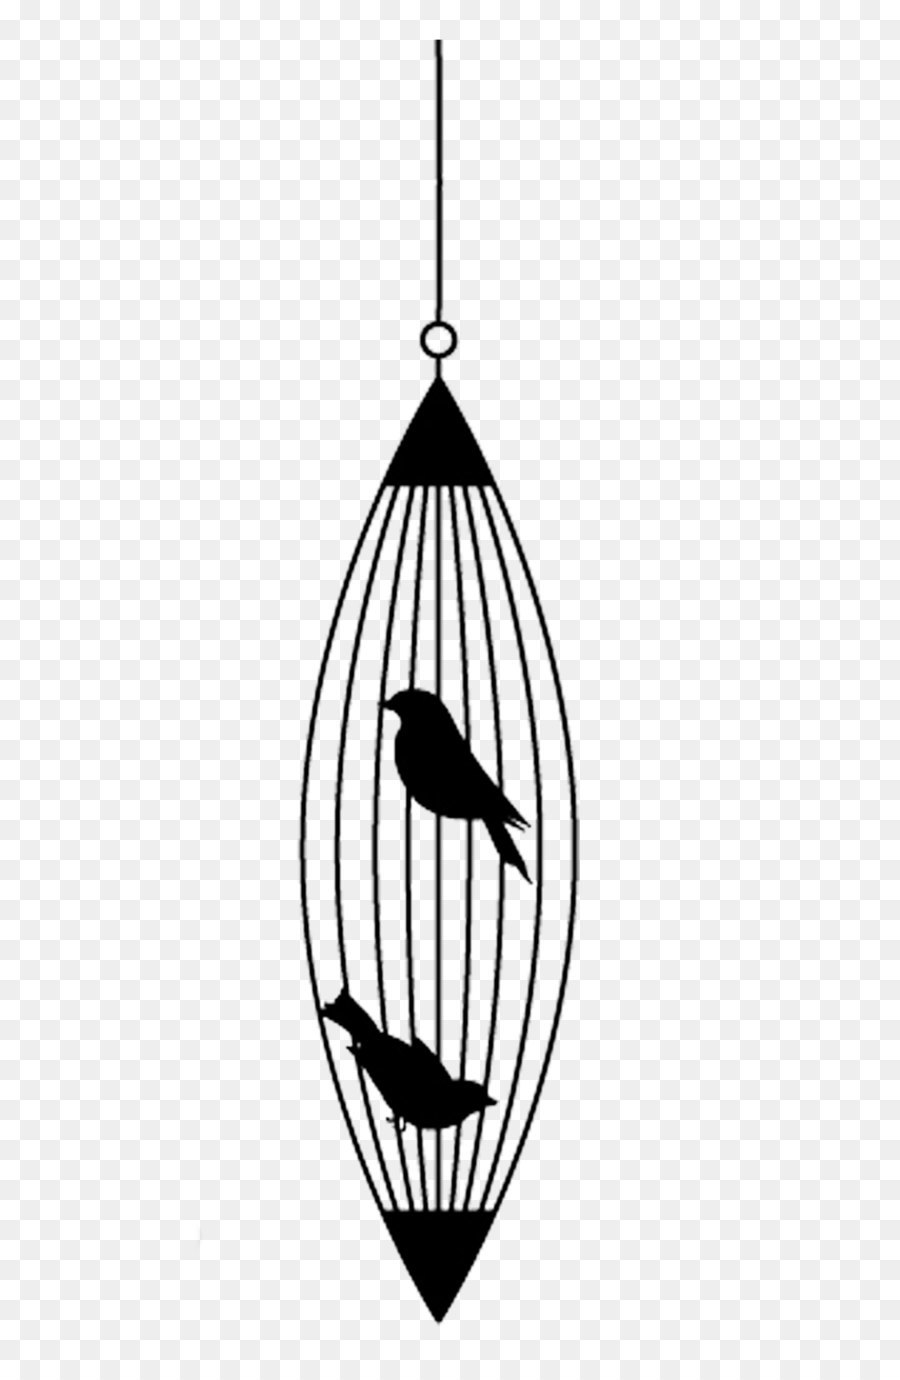 Oval bird cage png download - 1181*2500 - Free Transparent Bird png Download.